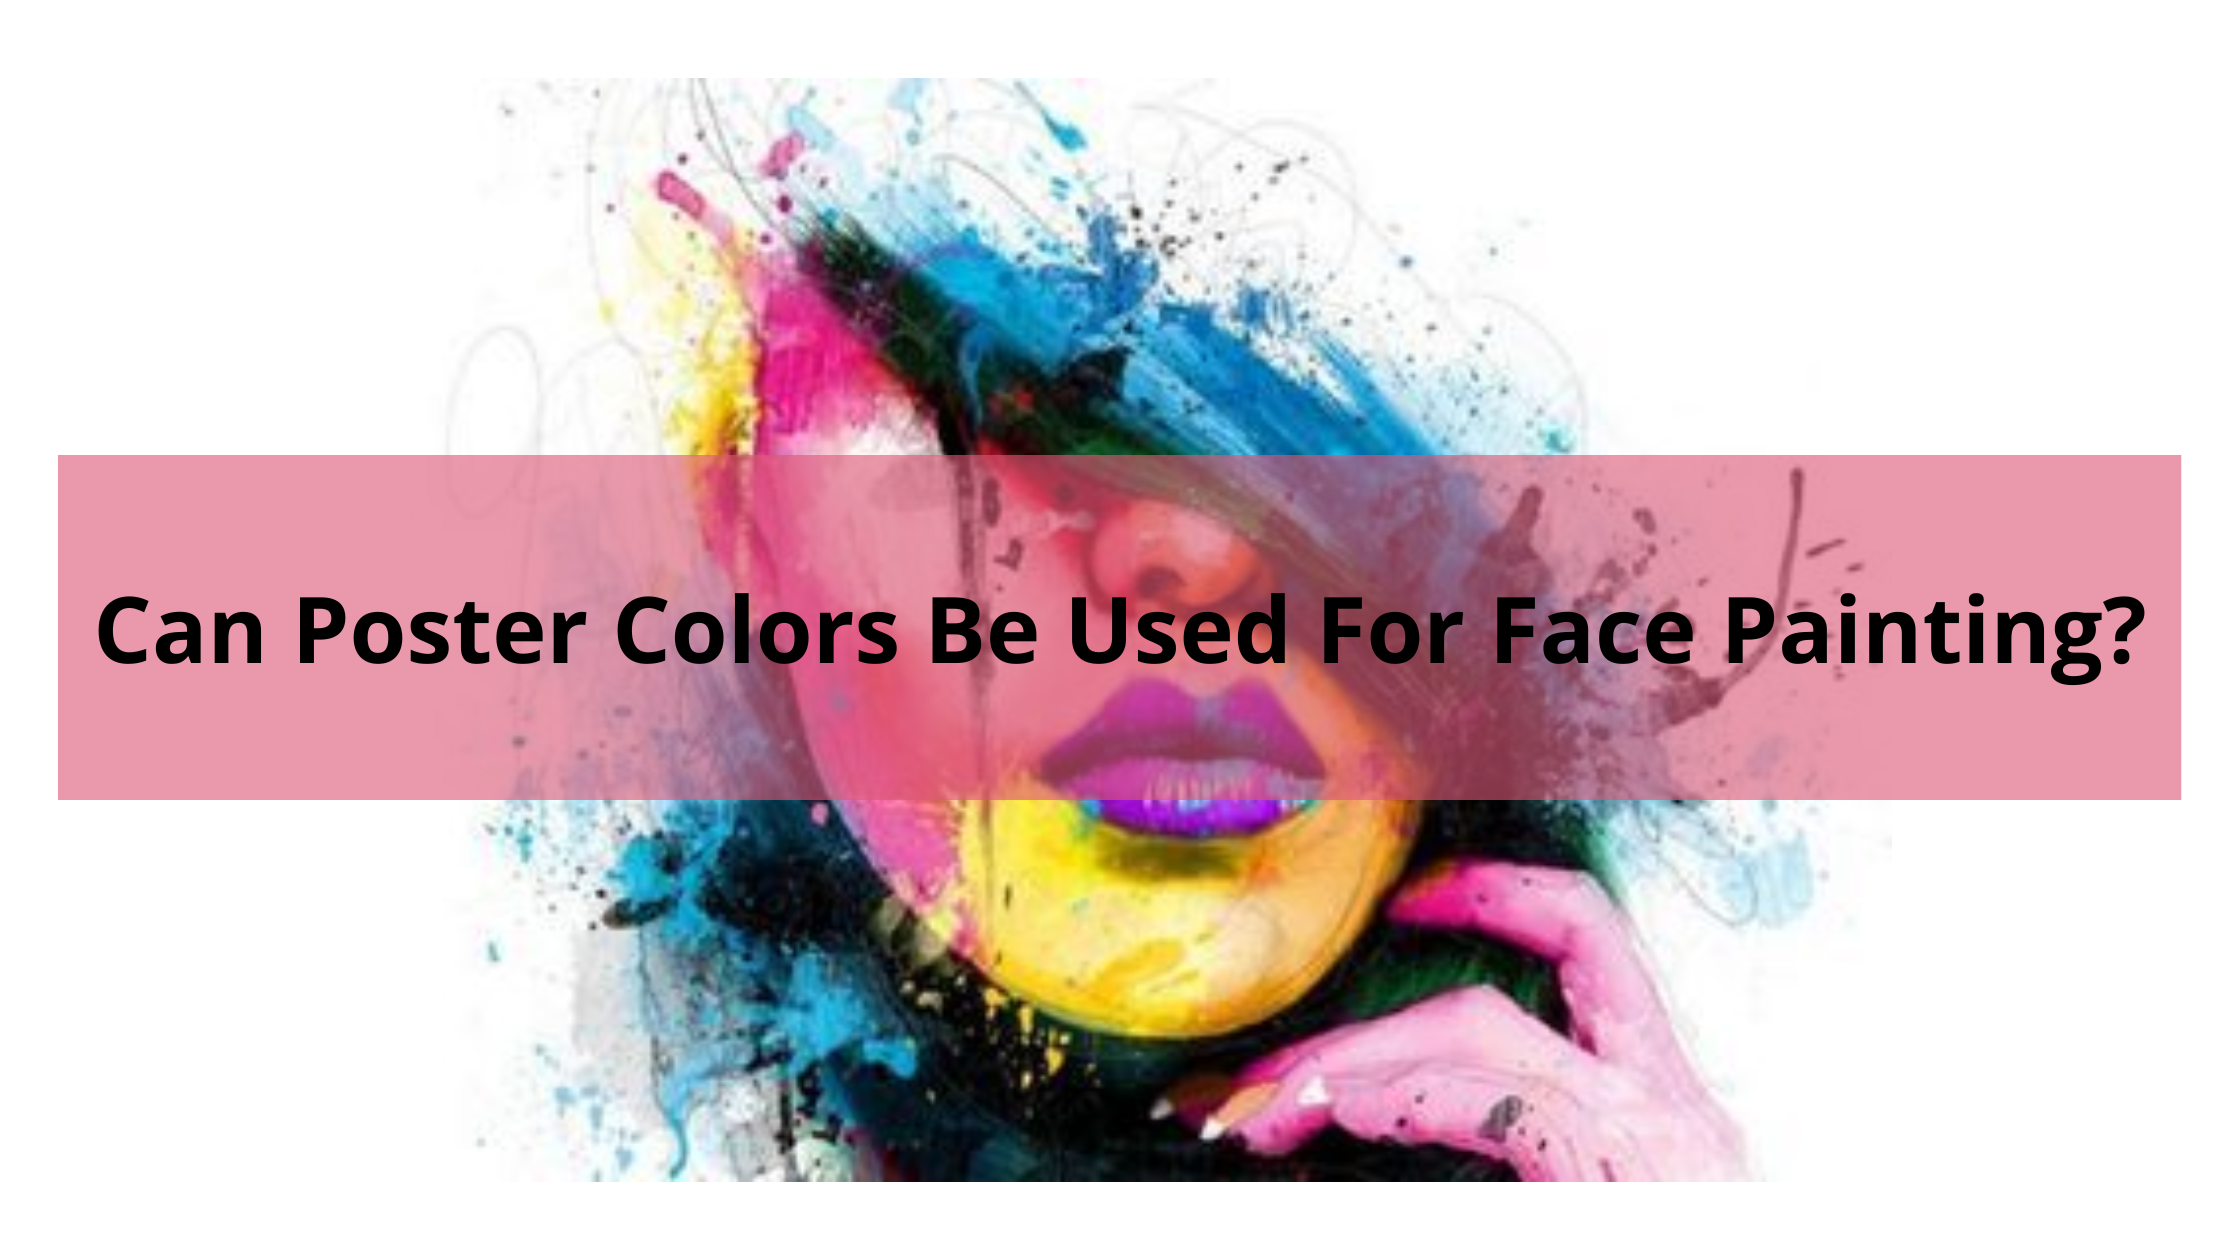 Can Poster Colors Be Used For Face Painting?